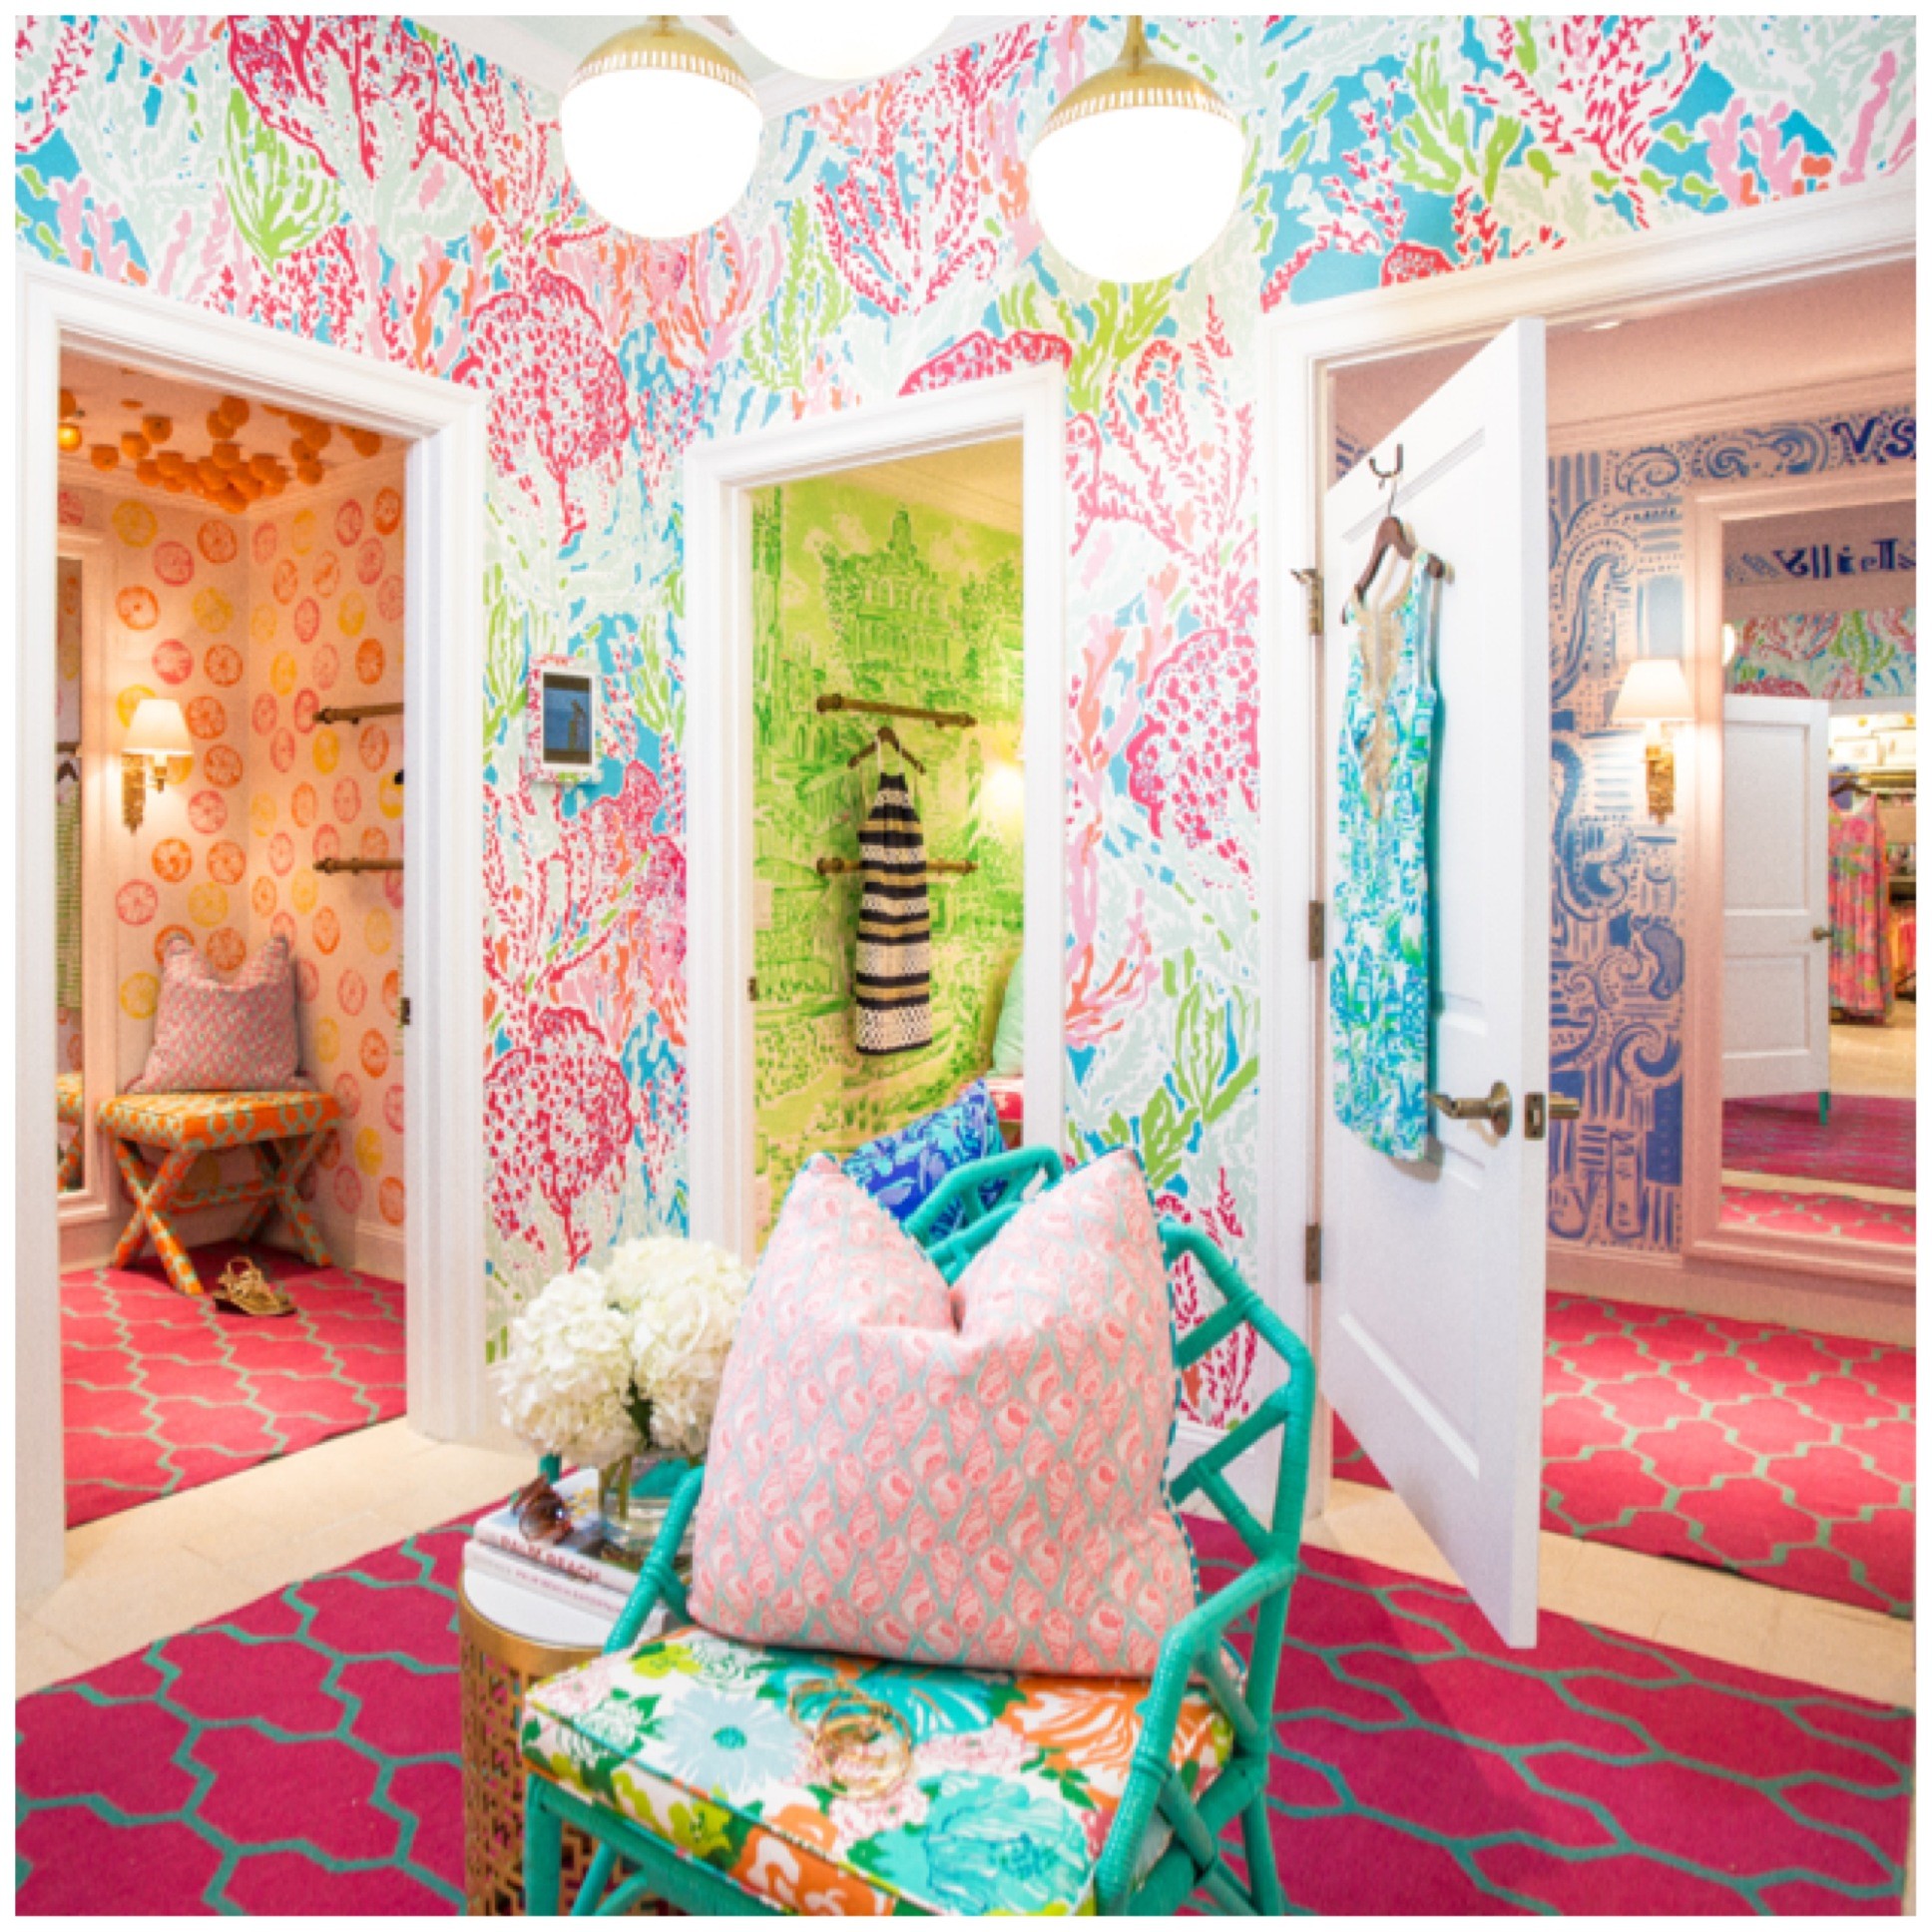 The Lilly Pulitzer dressing room I was in a couple weeks ago